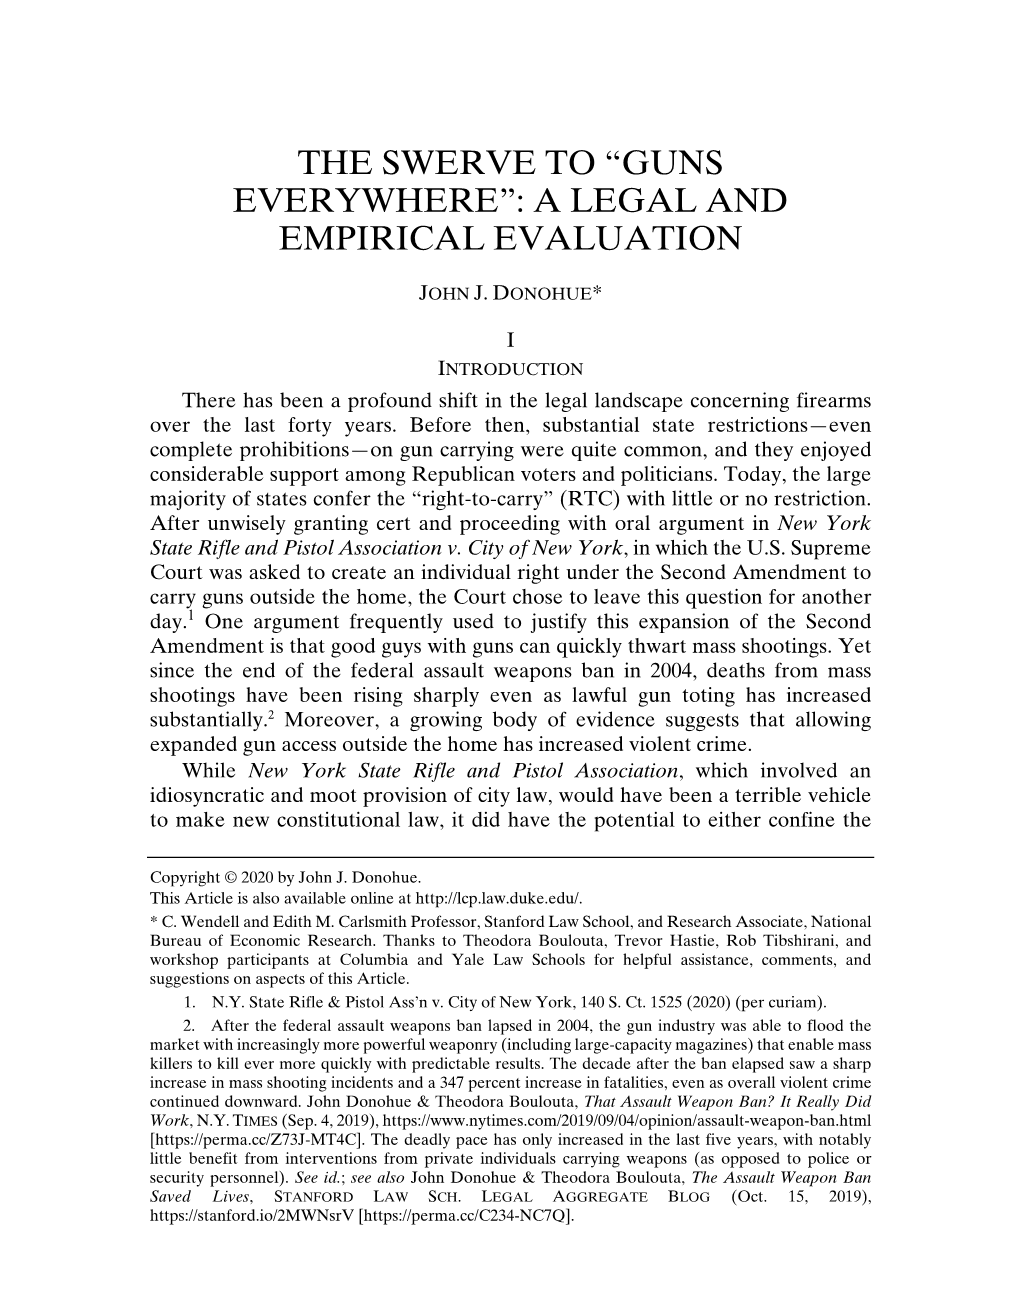 The Swerve to “Guns Everywhere”: a Legal and Empirical Evaluation